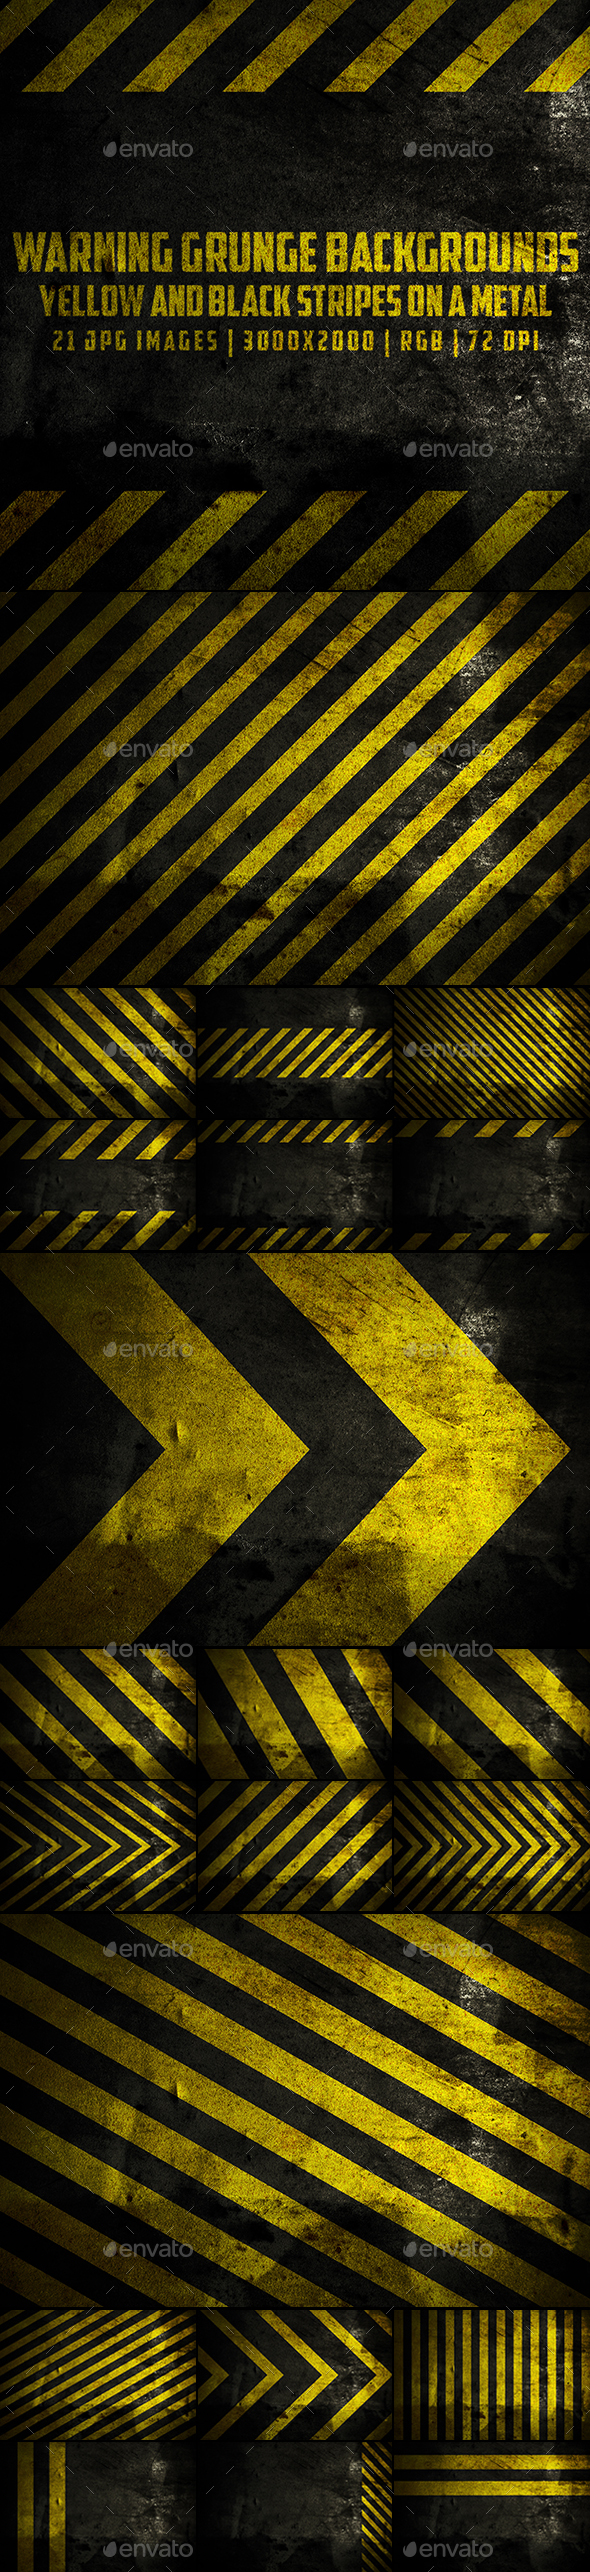 yellow and black stripes background